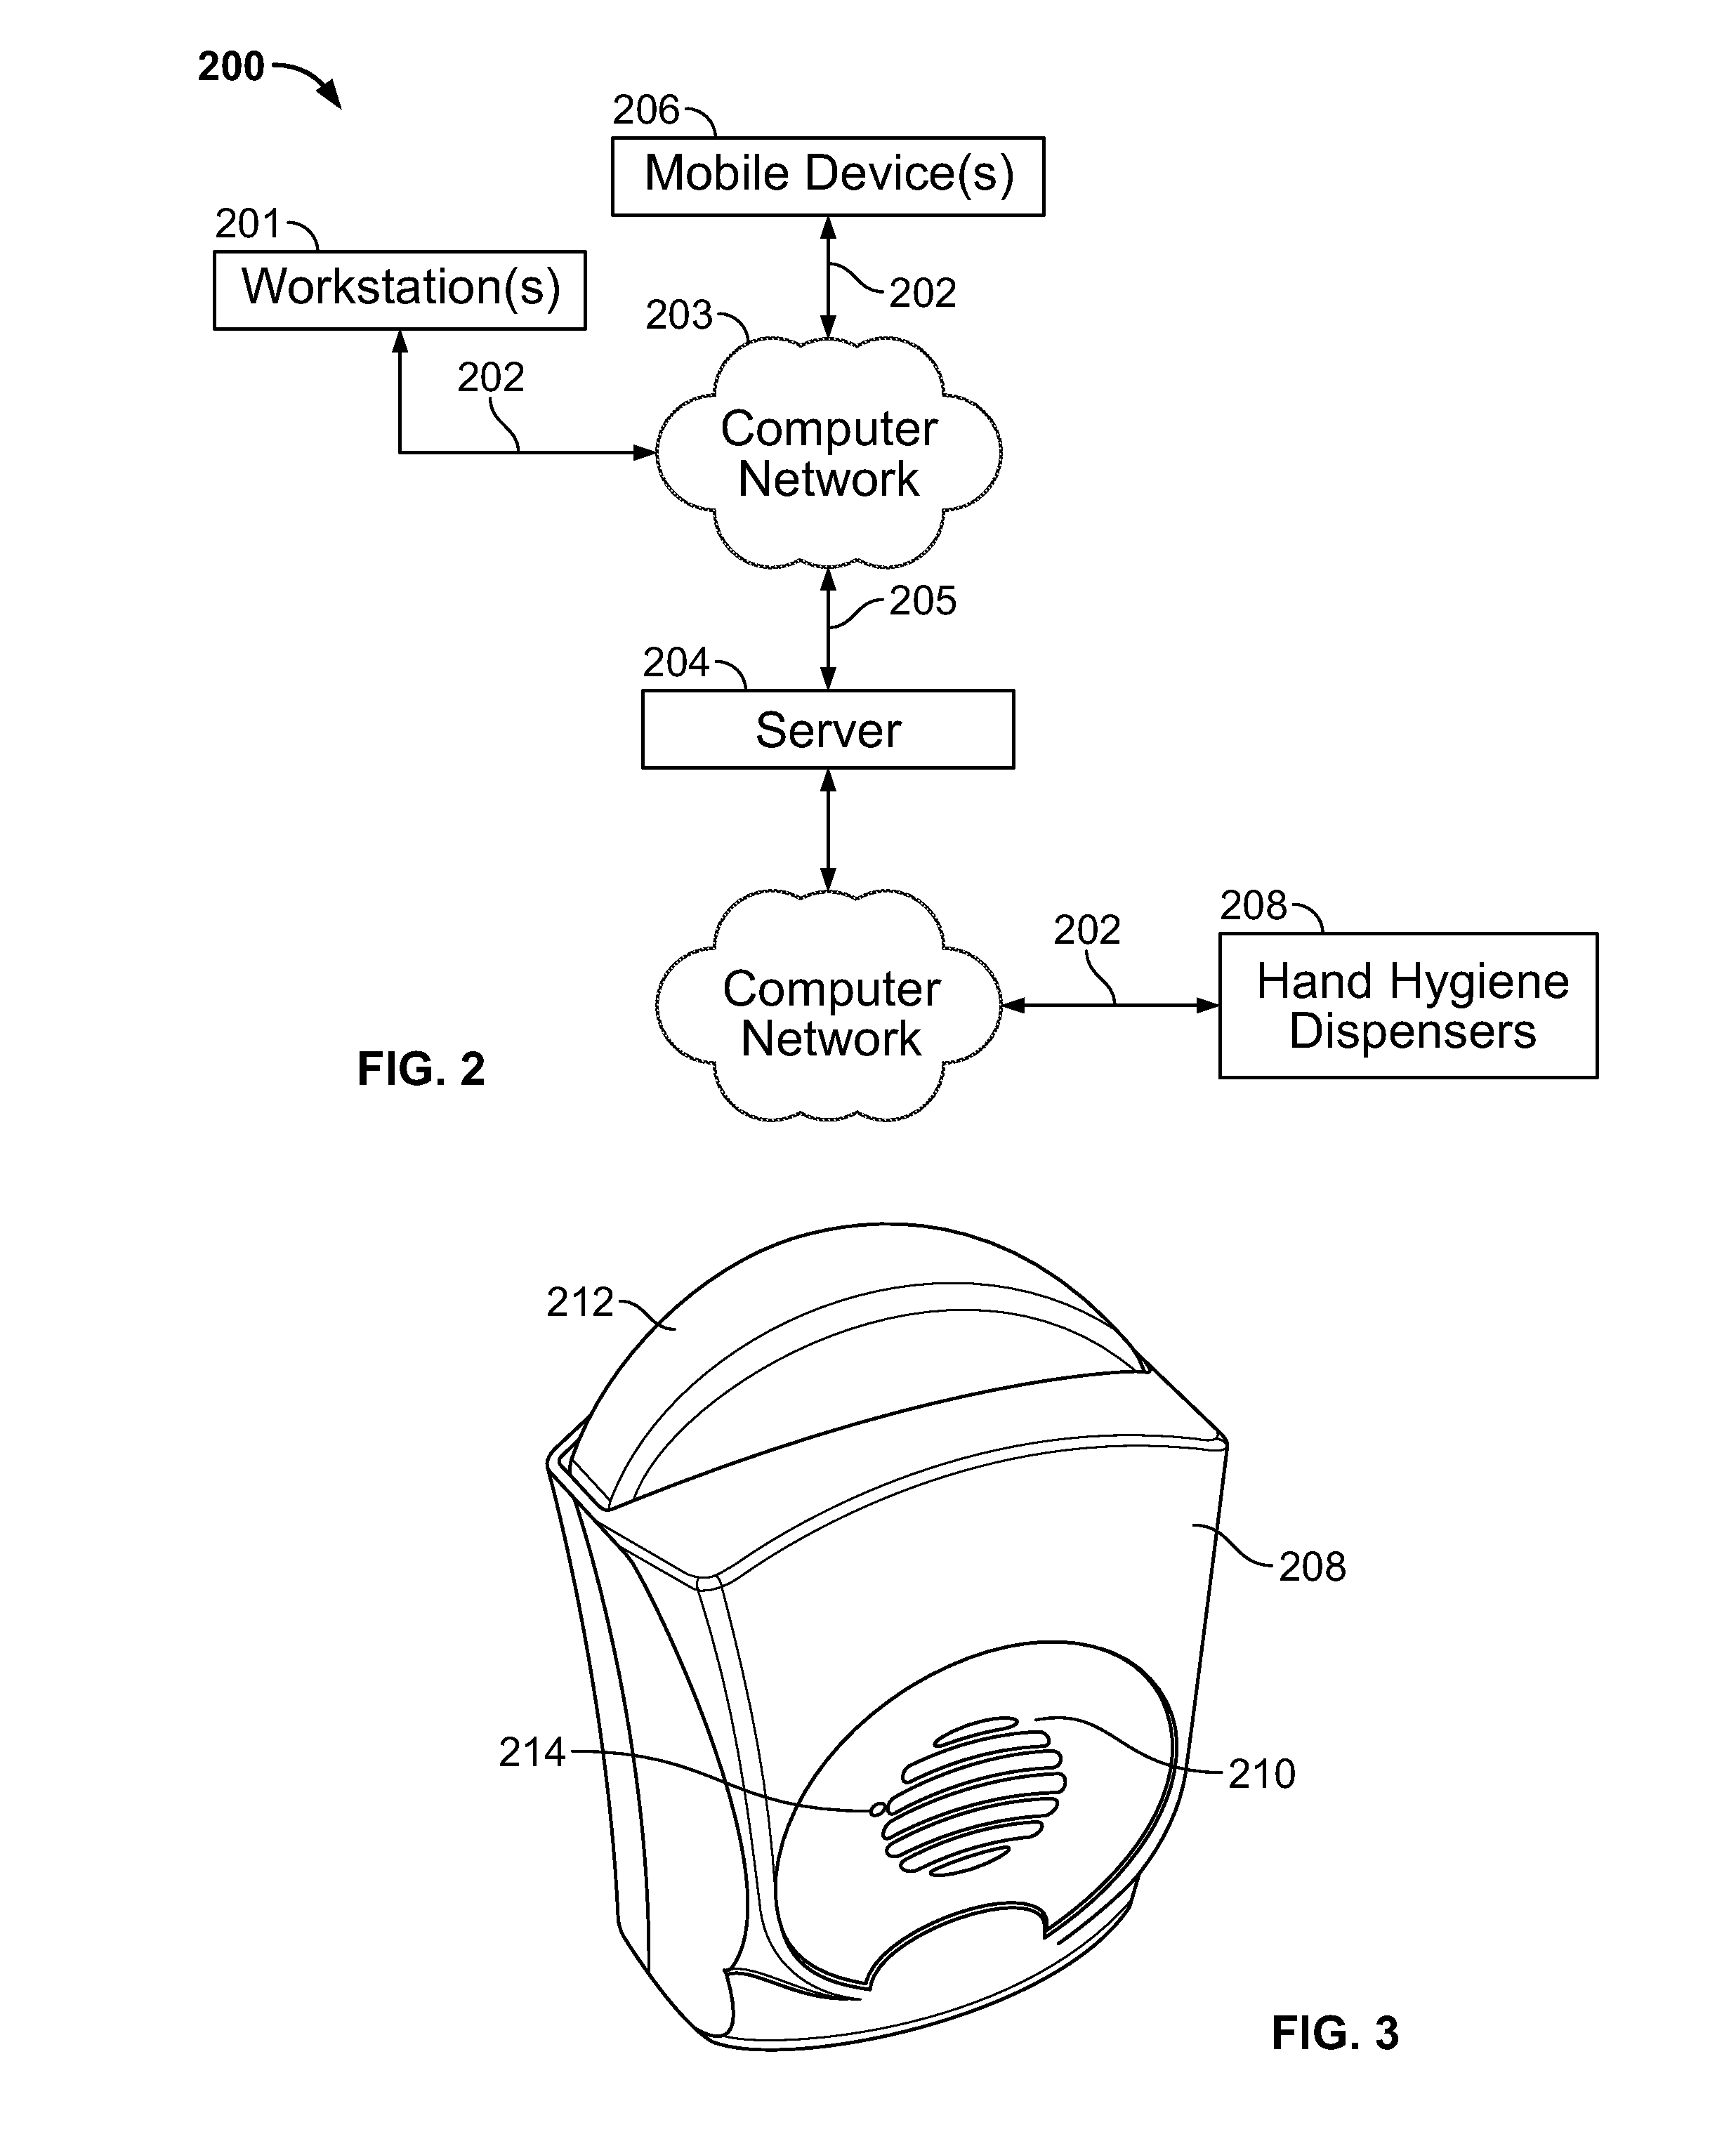 Method and system for ensuring and tracking hand hygiene compliance